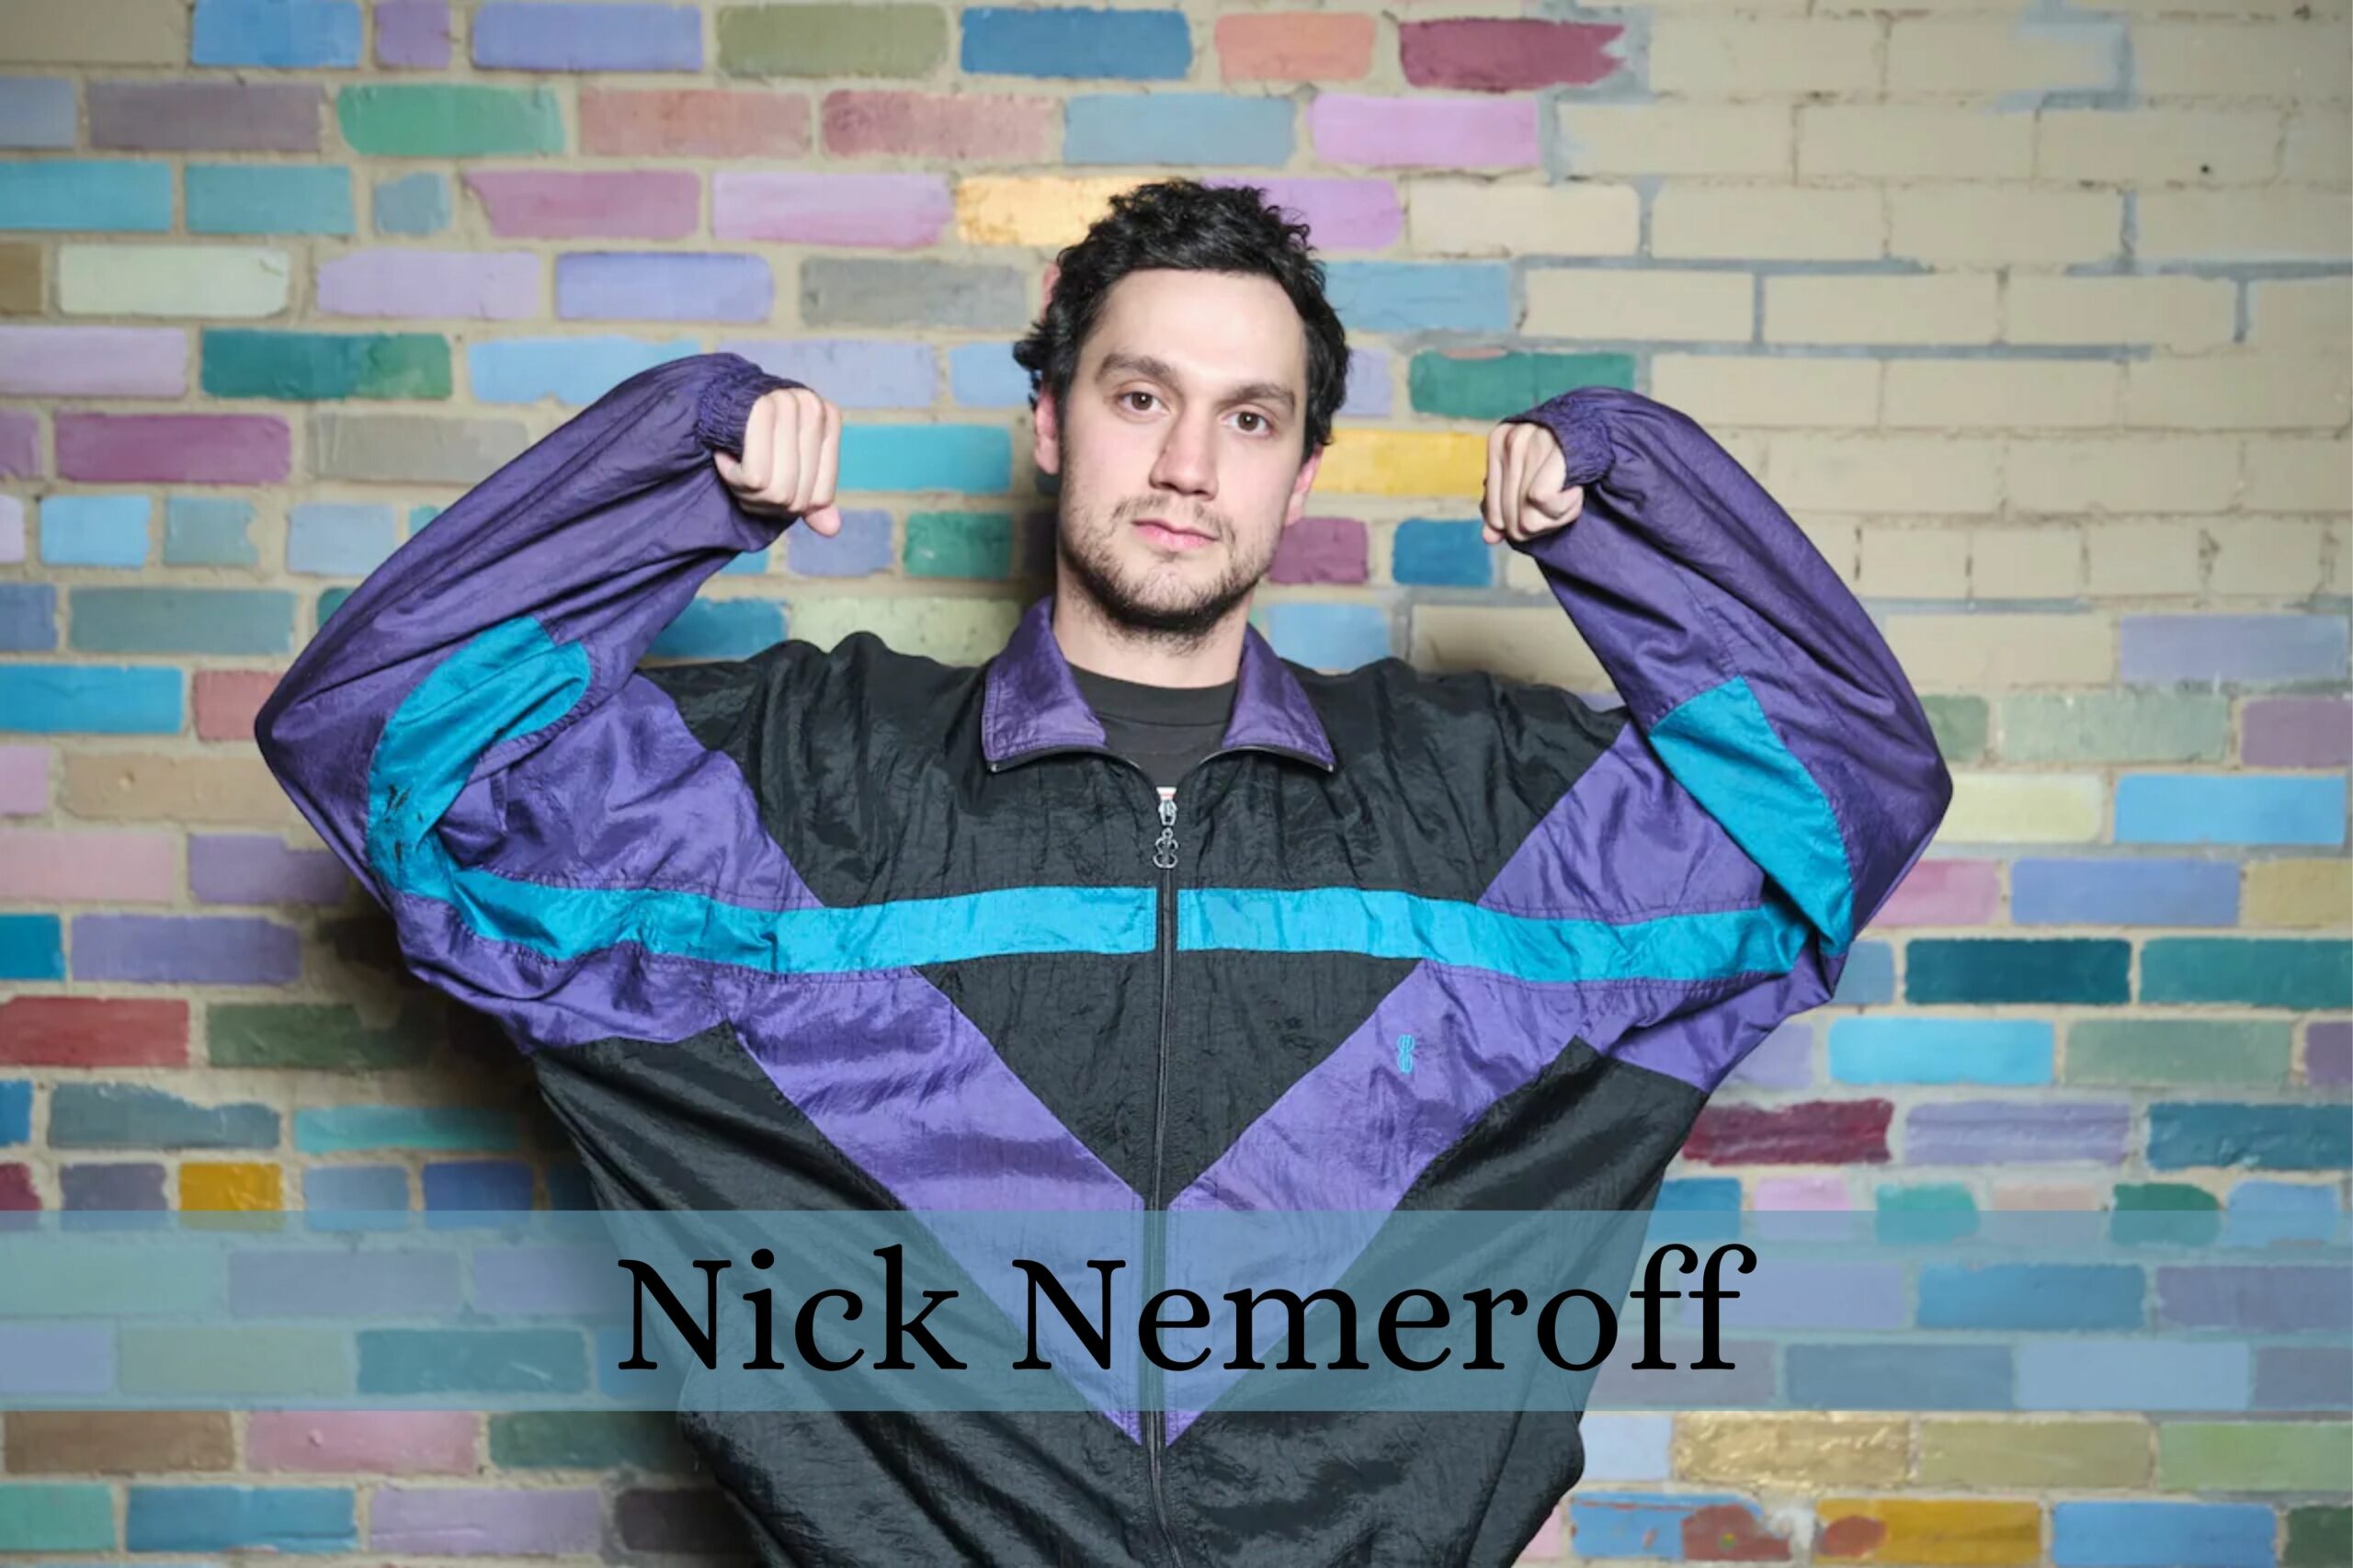 How Nick Nemeroff Dies? Does He Have Any Illnesses?